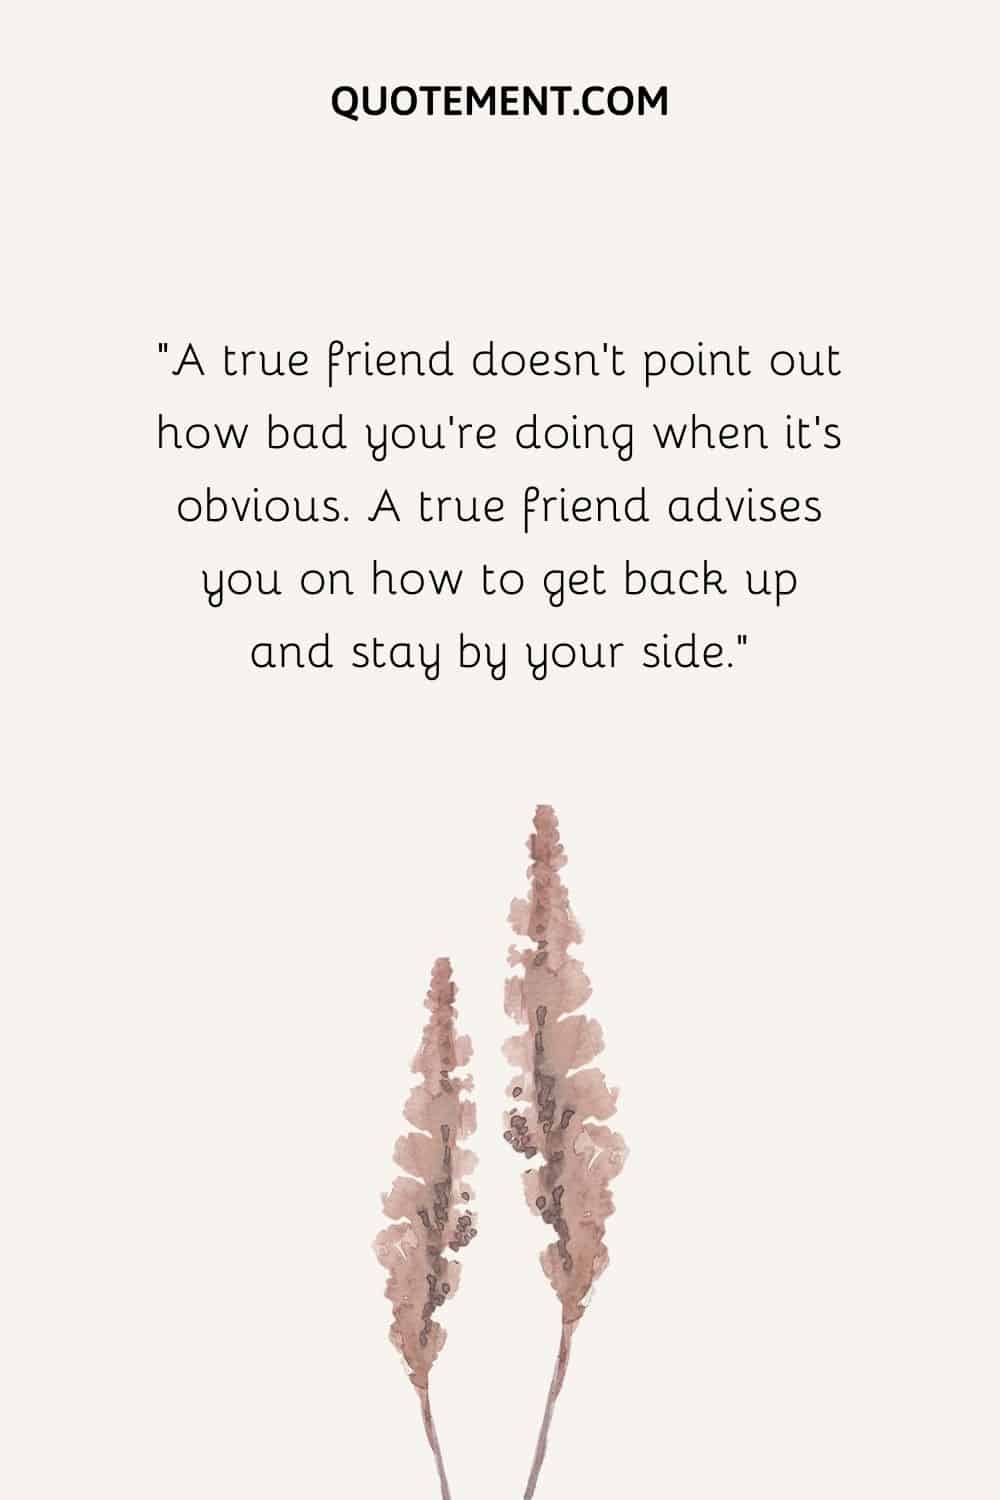 A true friend doesn't point out how bad you're doing when it's obvious. A true friend advises you on how to get back up and stay by your side.